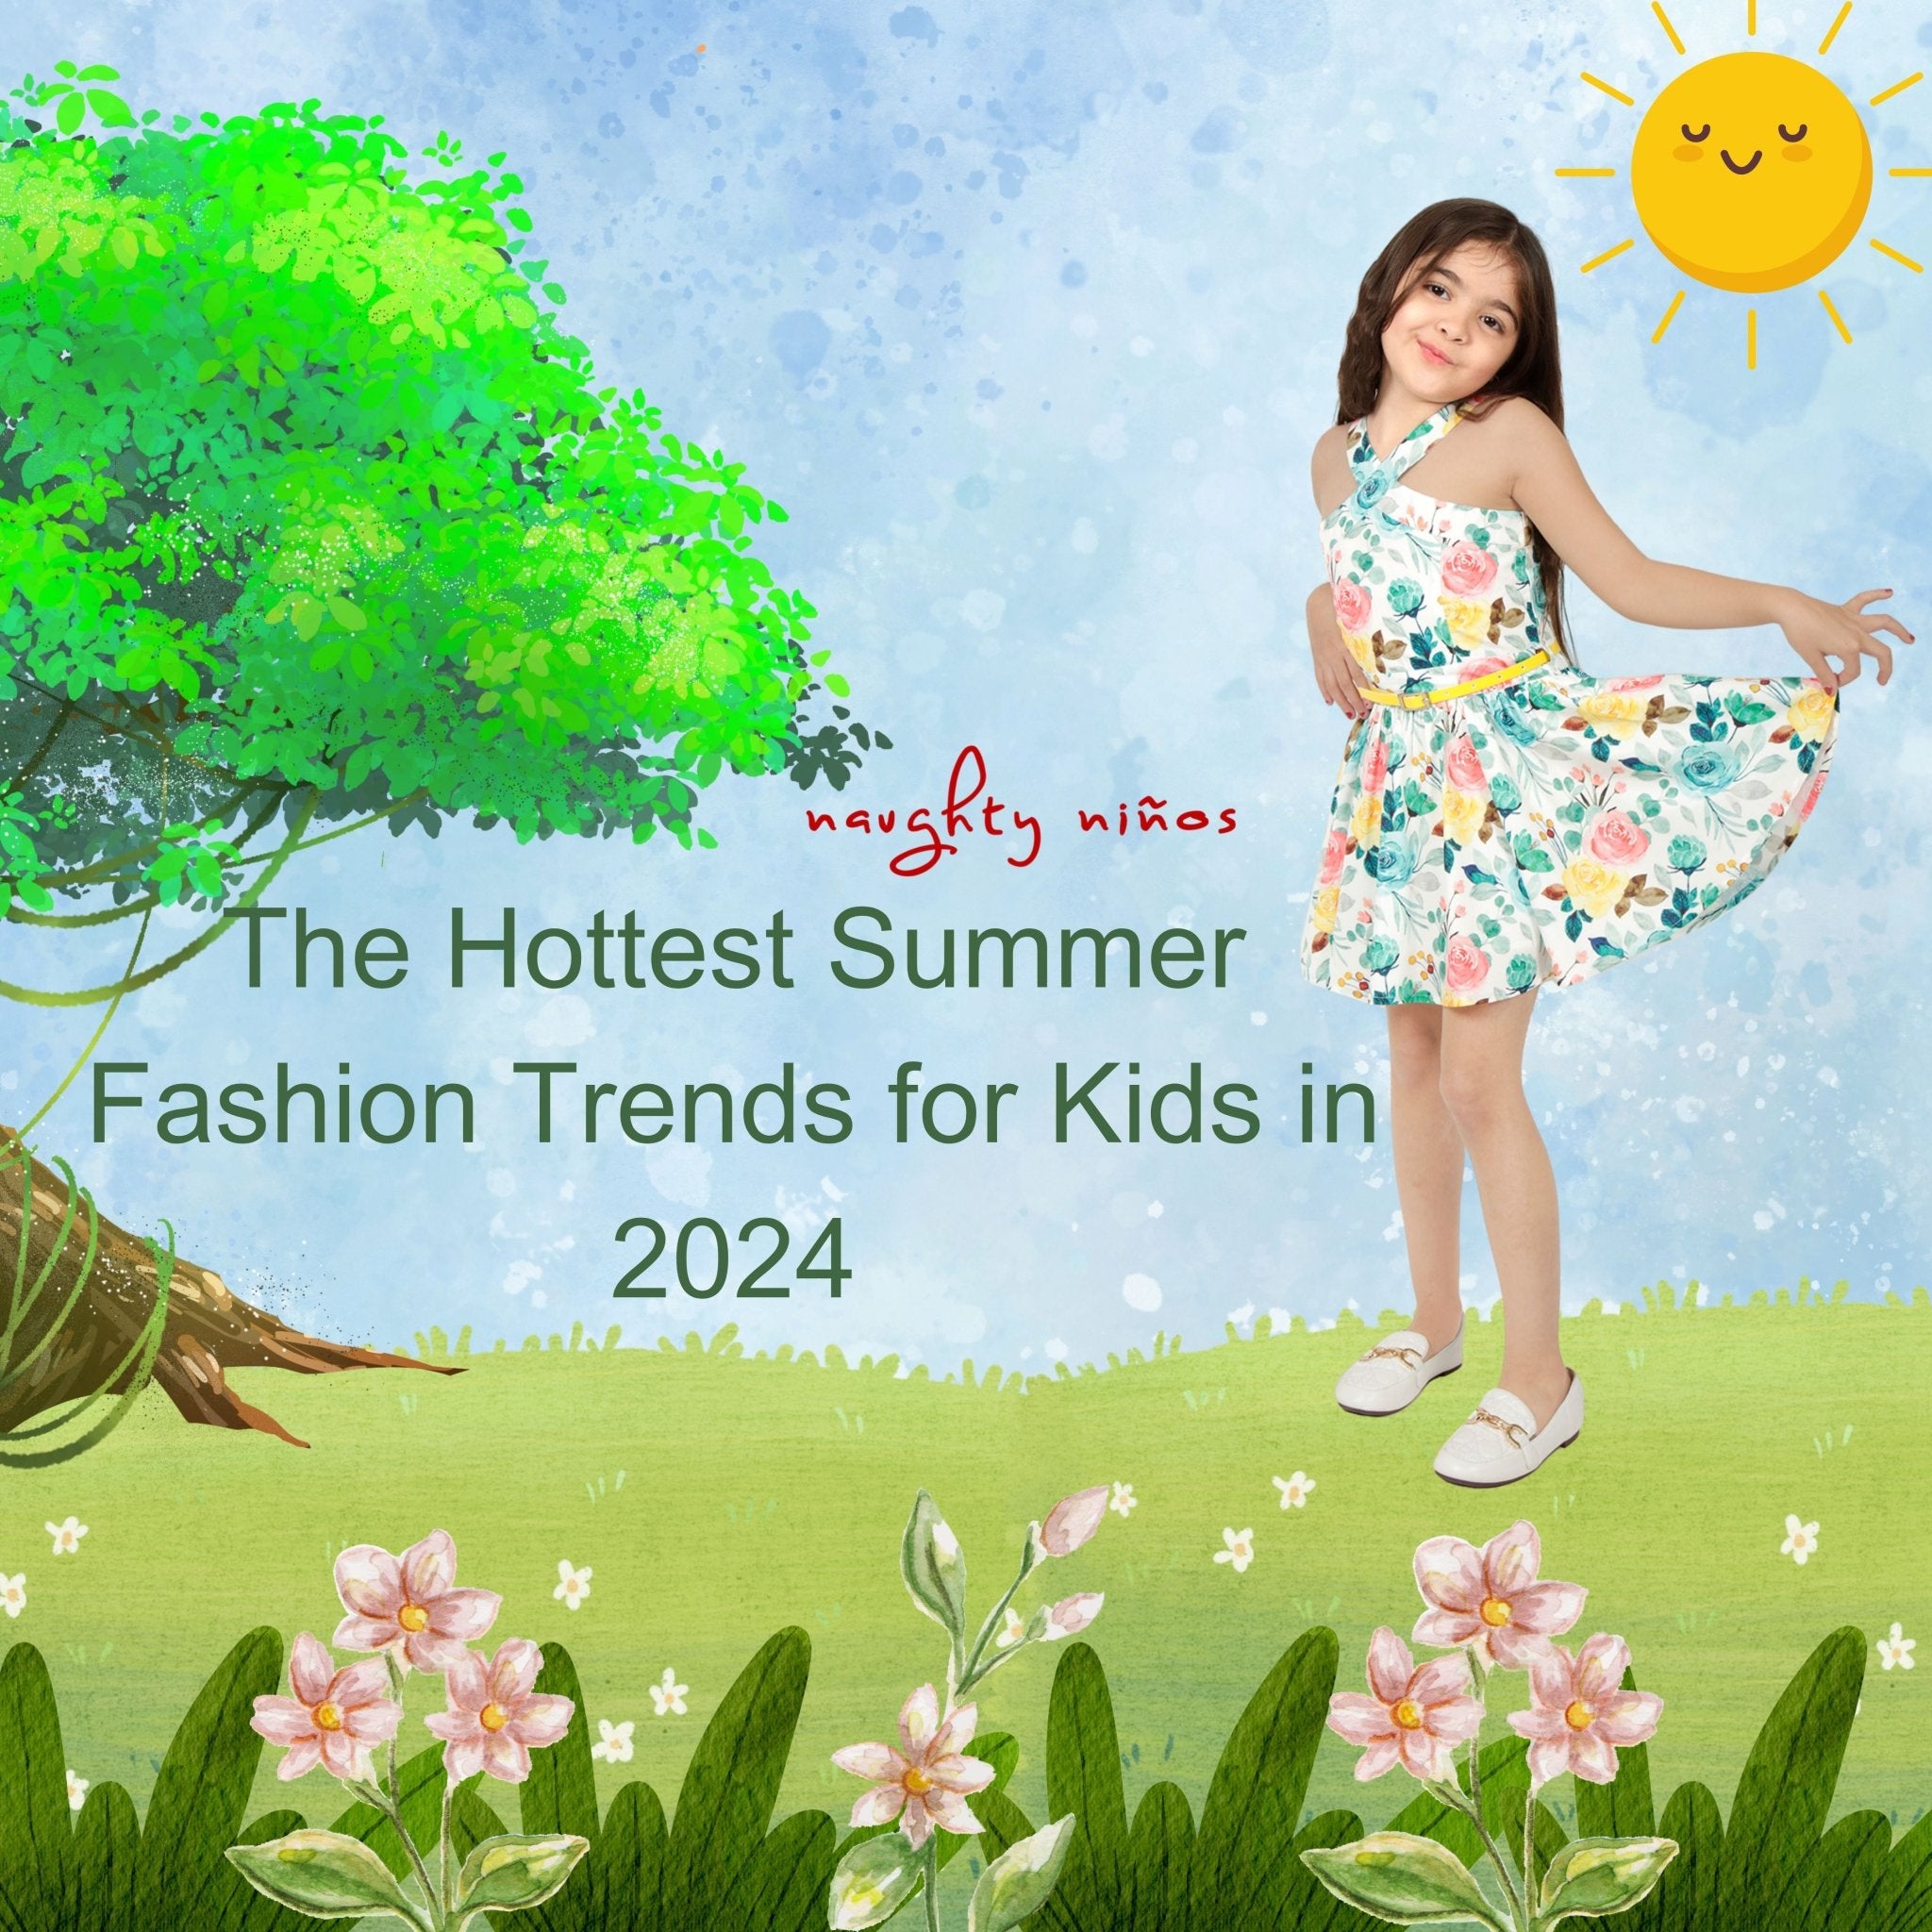 The Hottest Summer Fashion Trends for Kids in 2024